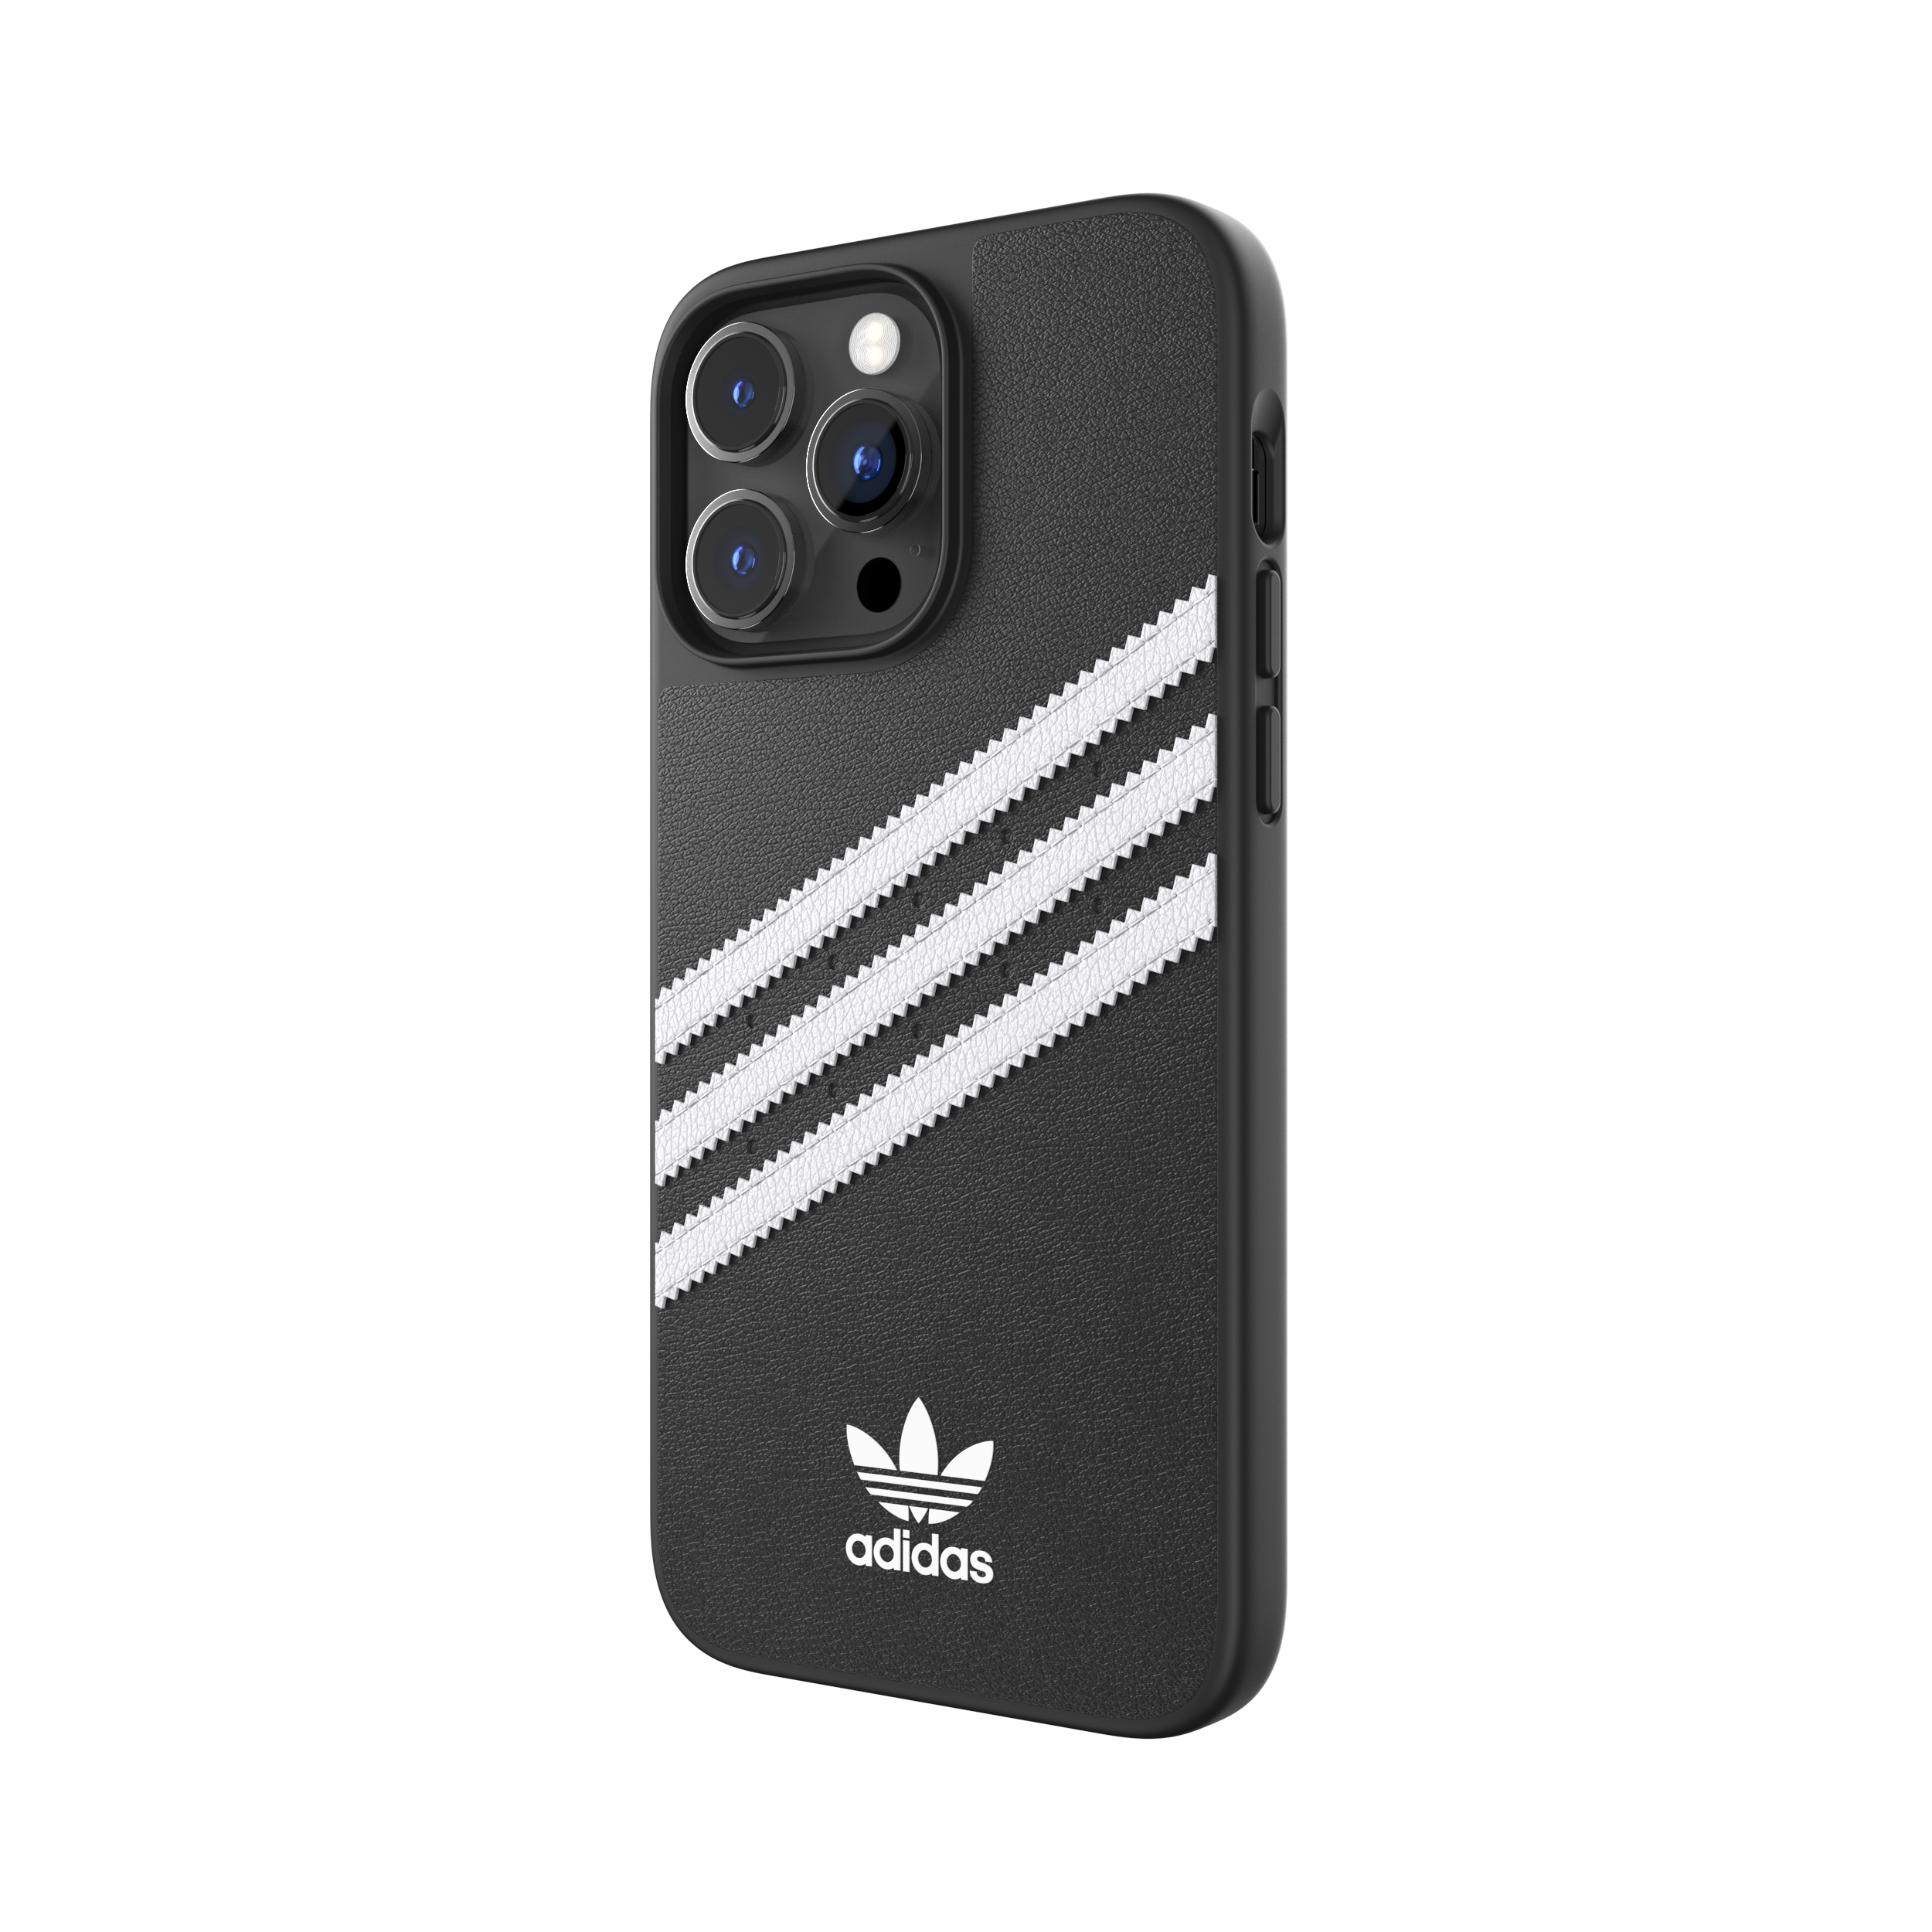 14 BLACK Backcover, APPLE, PRO IPHONE ADIDAS MAX, PU, Moulded Case